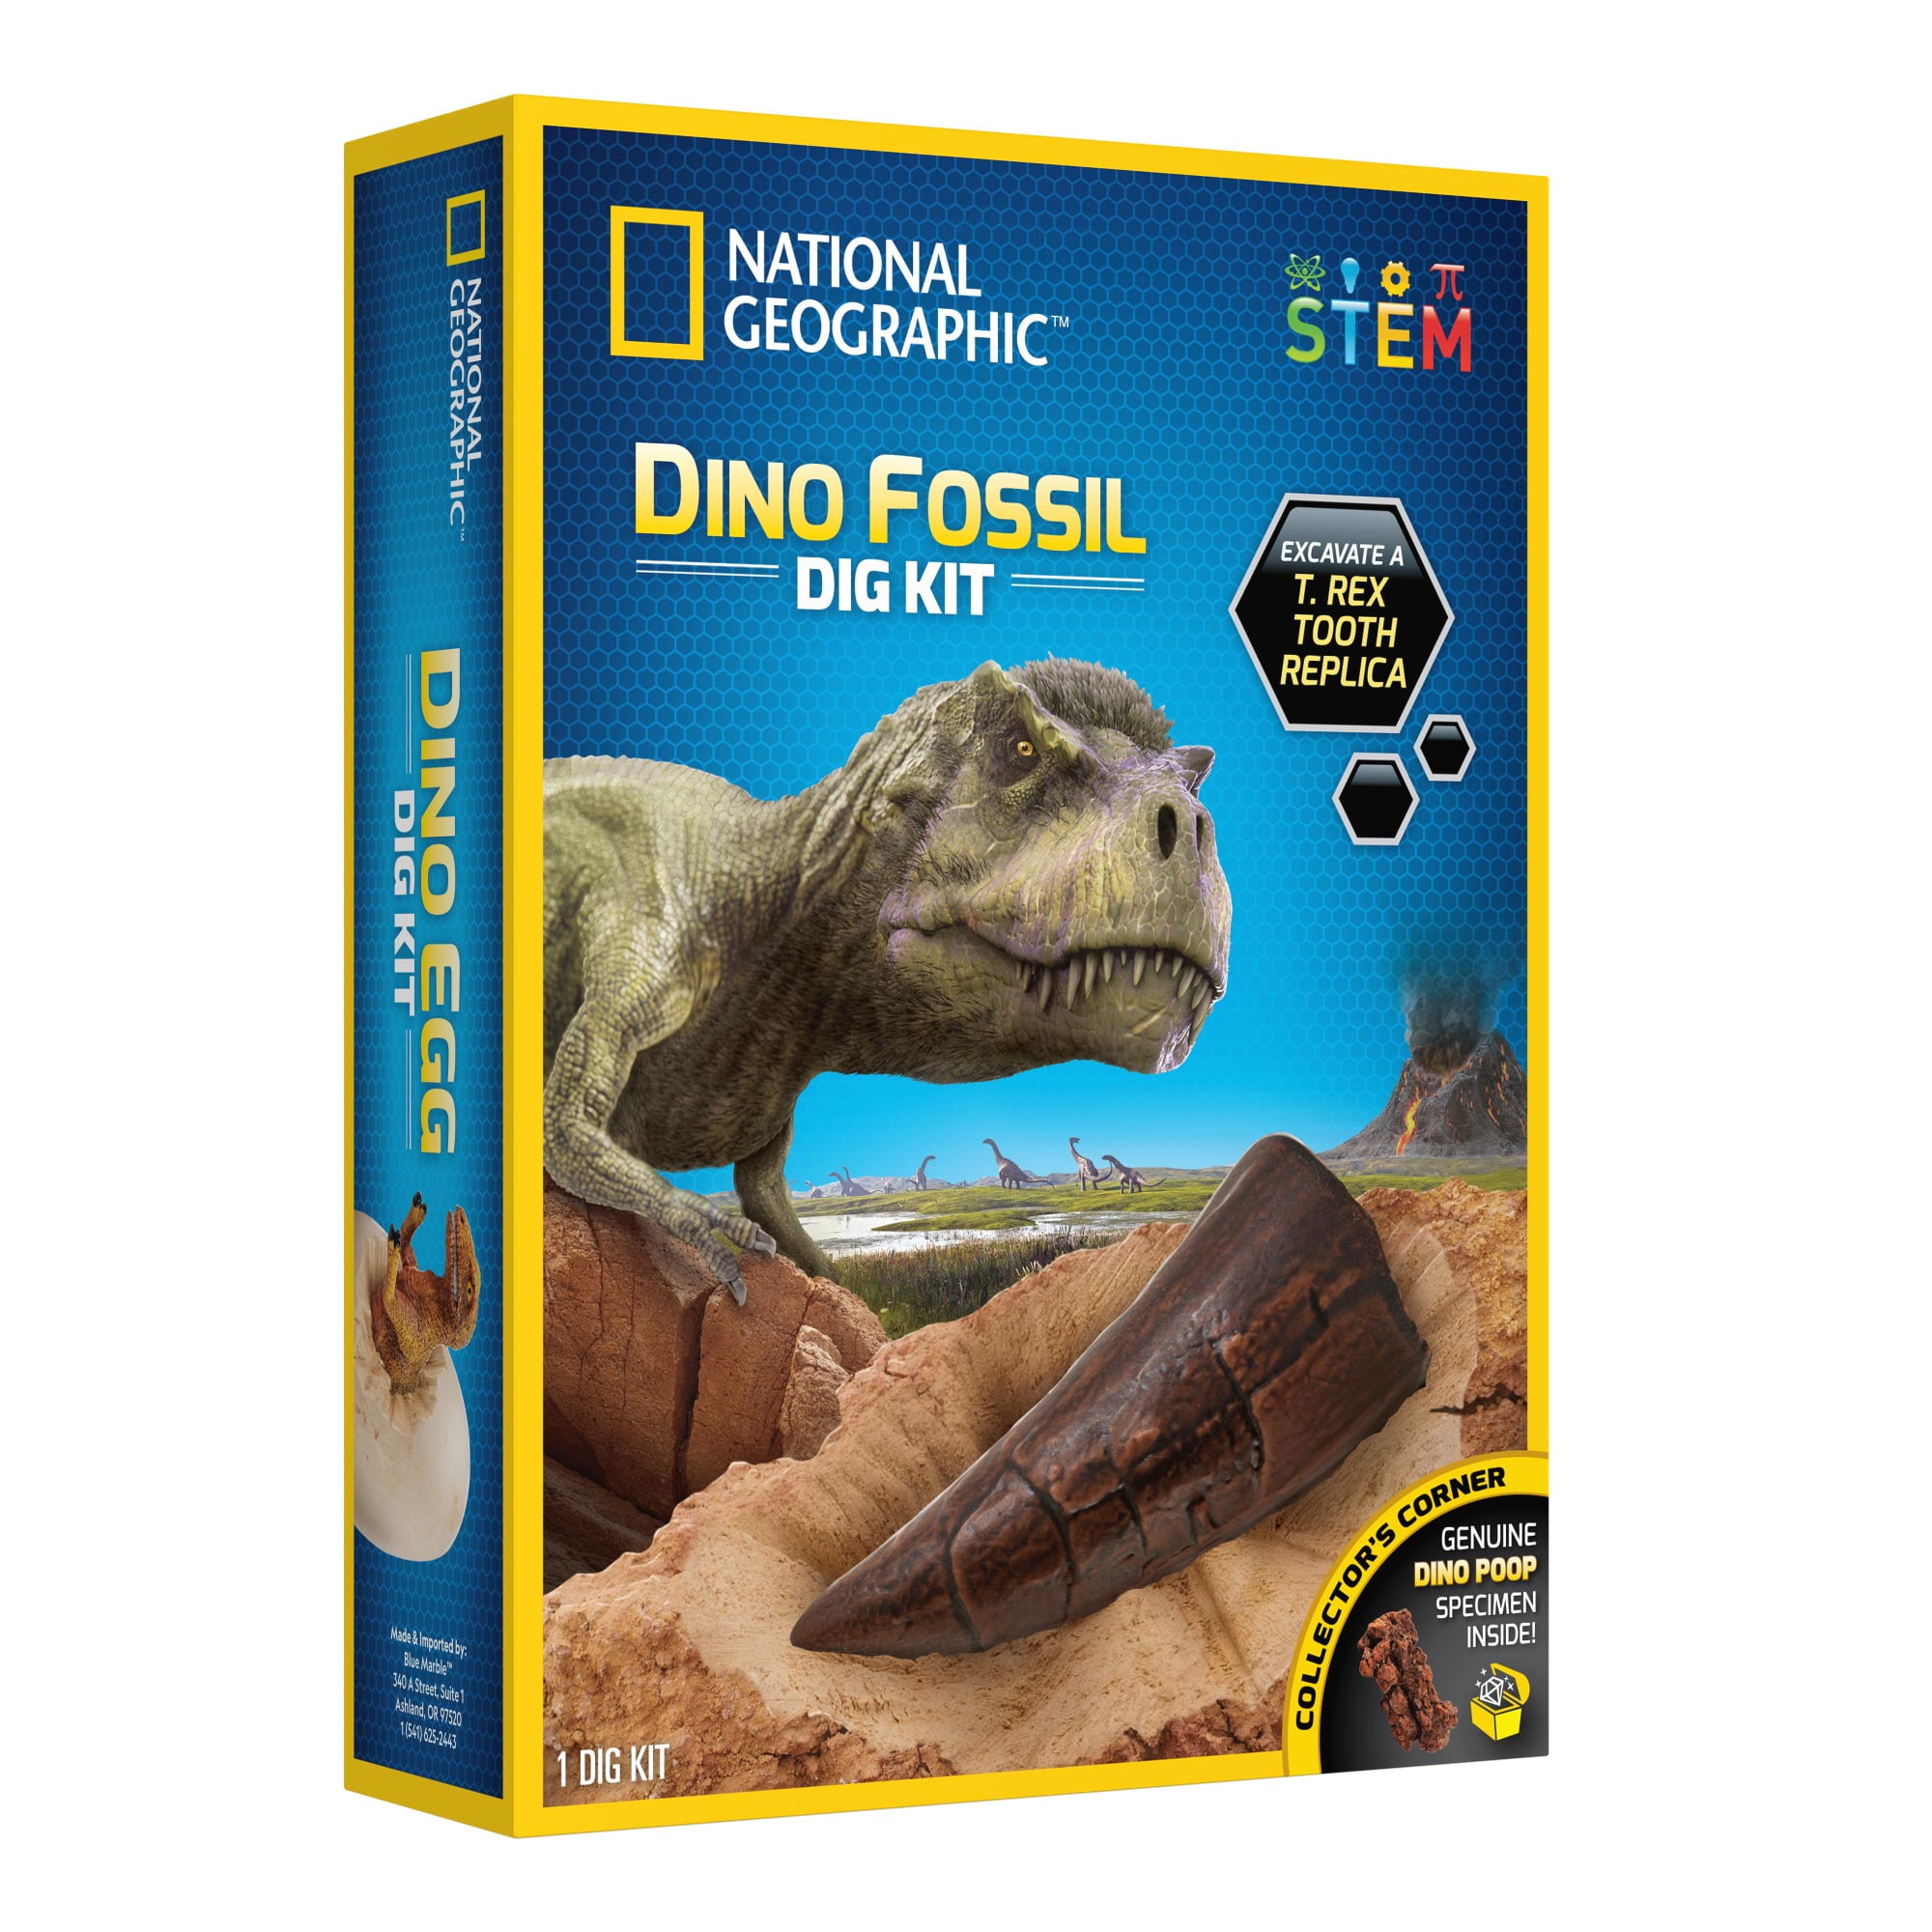 DIG TEAM DINO DIG 2 IN 1 TRICERATOPS DINOSAUR  BOX SET 15 PCS WITH TOY BRAND NEW 